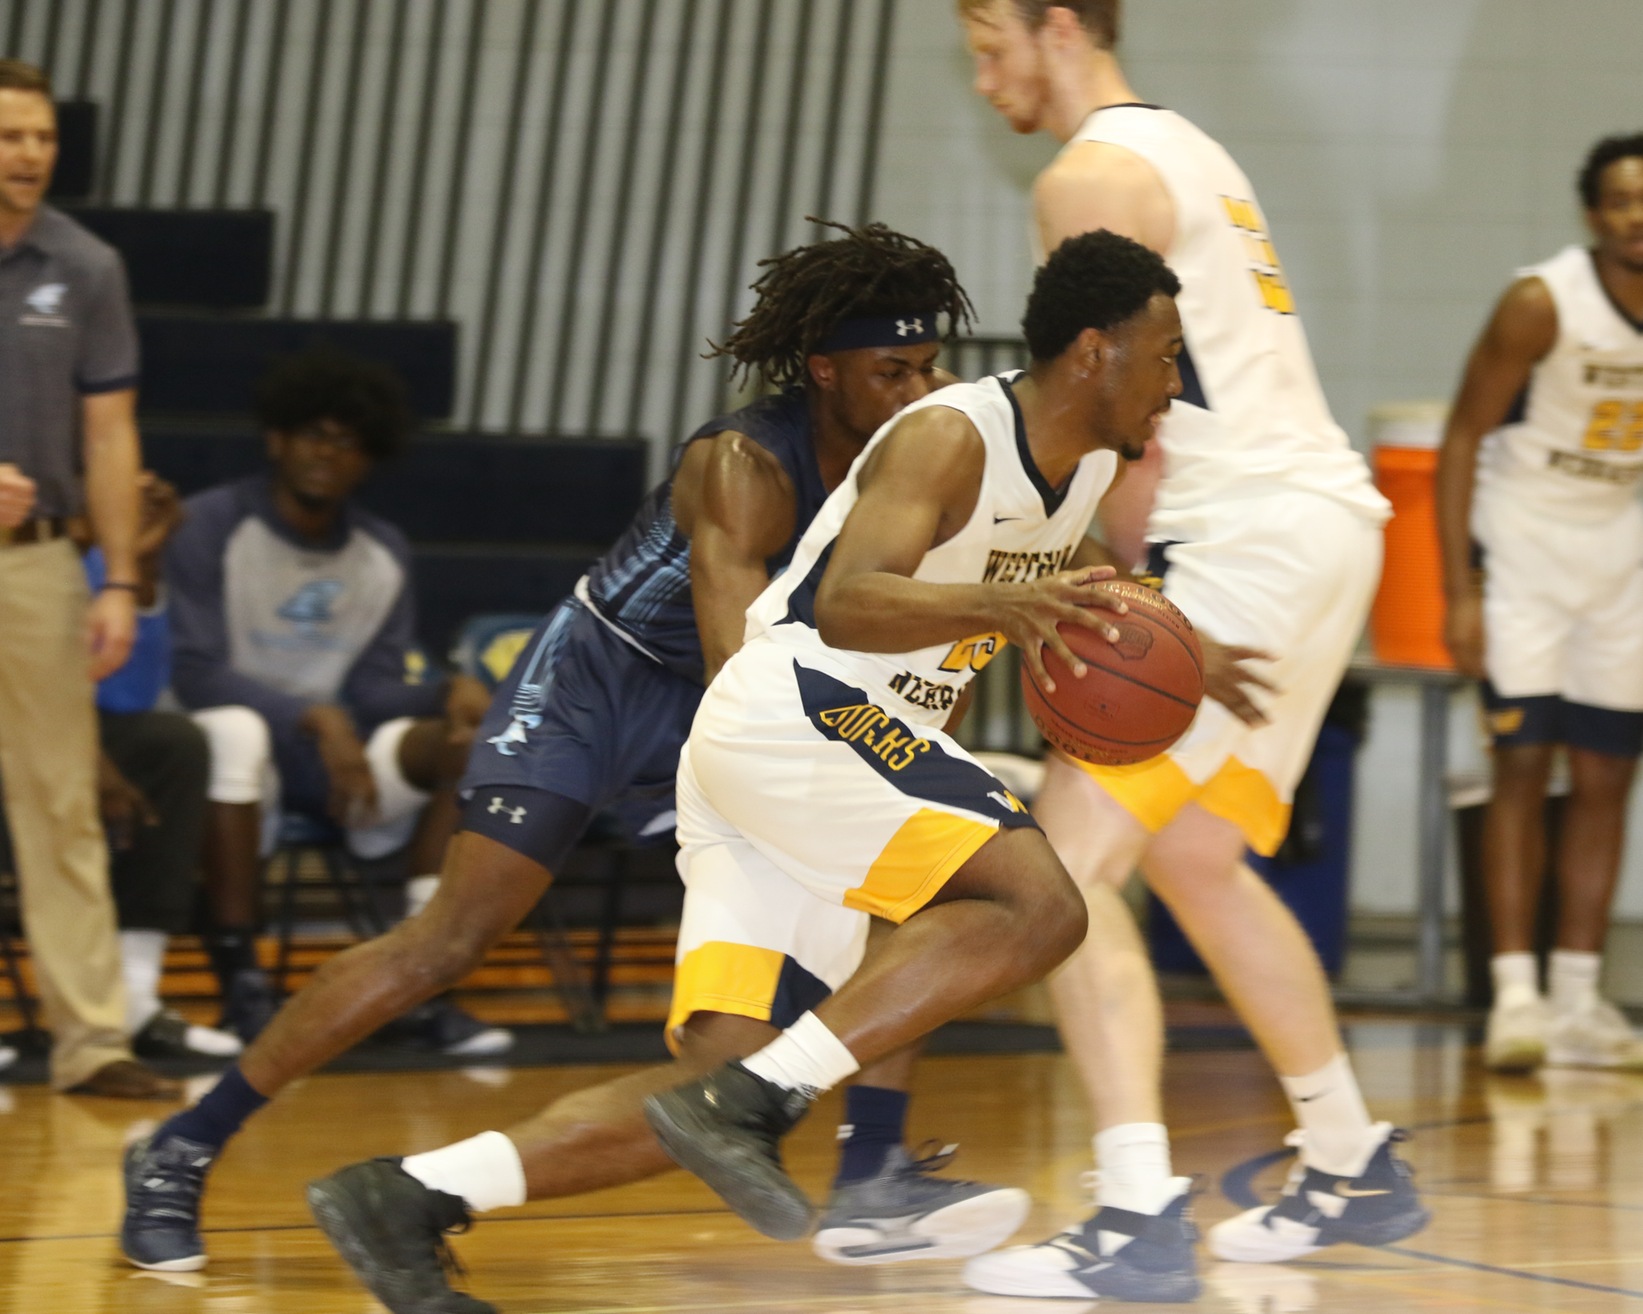 Sanchious scores 34 in WNCC win over Williston